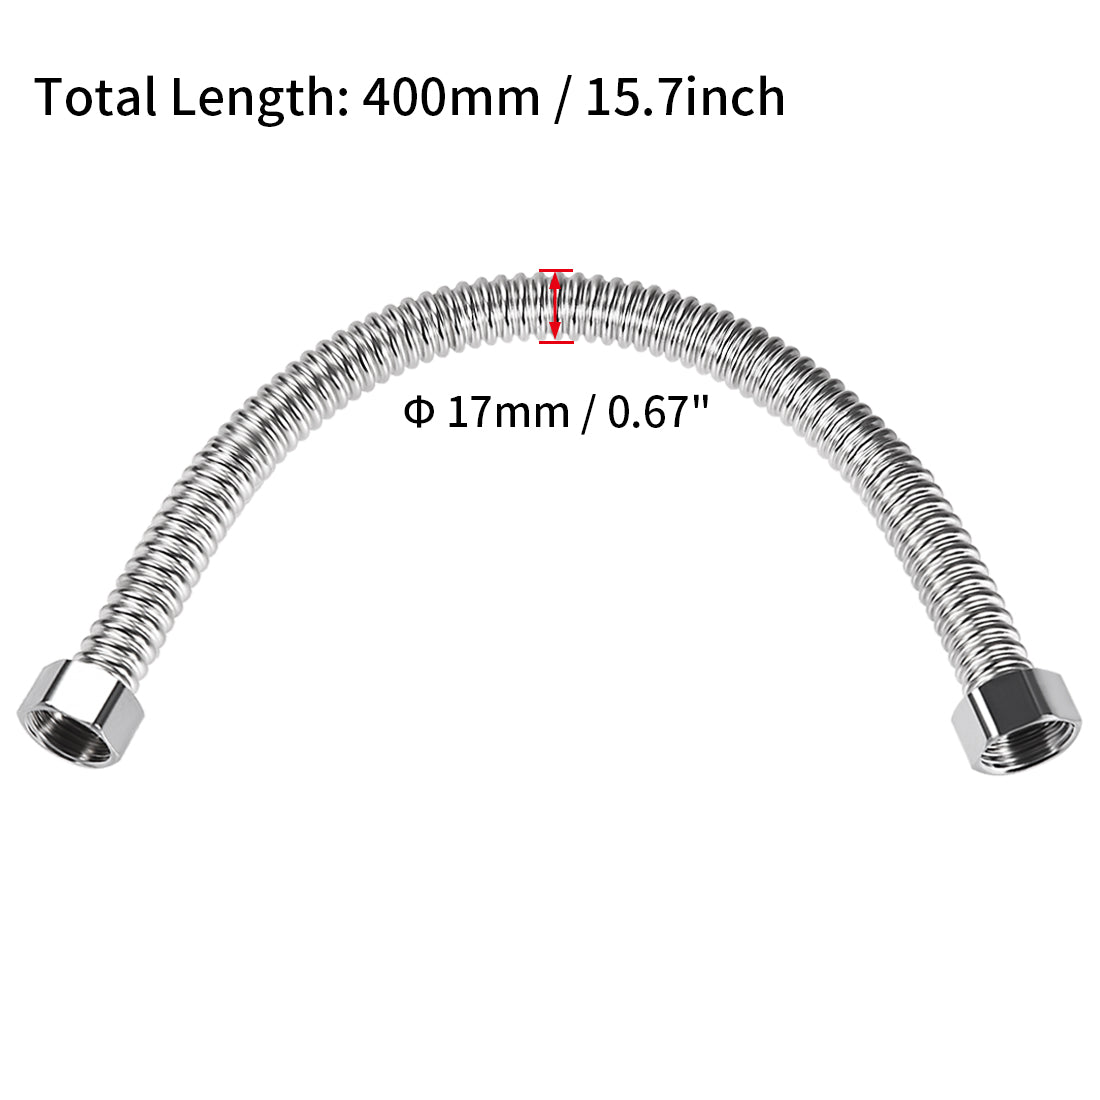 uxcell Uxcell Corrugated Stainless Steel Flexible Water Line 15.7inch Long G1/2 Female Threaded Connector with Washer , 4pcs